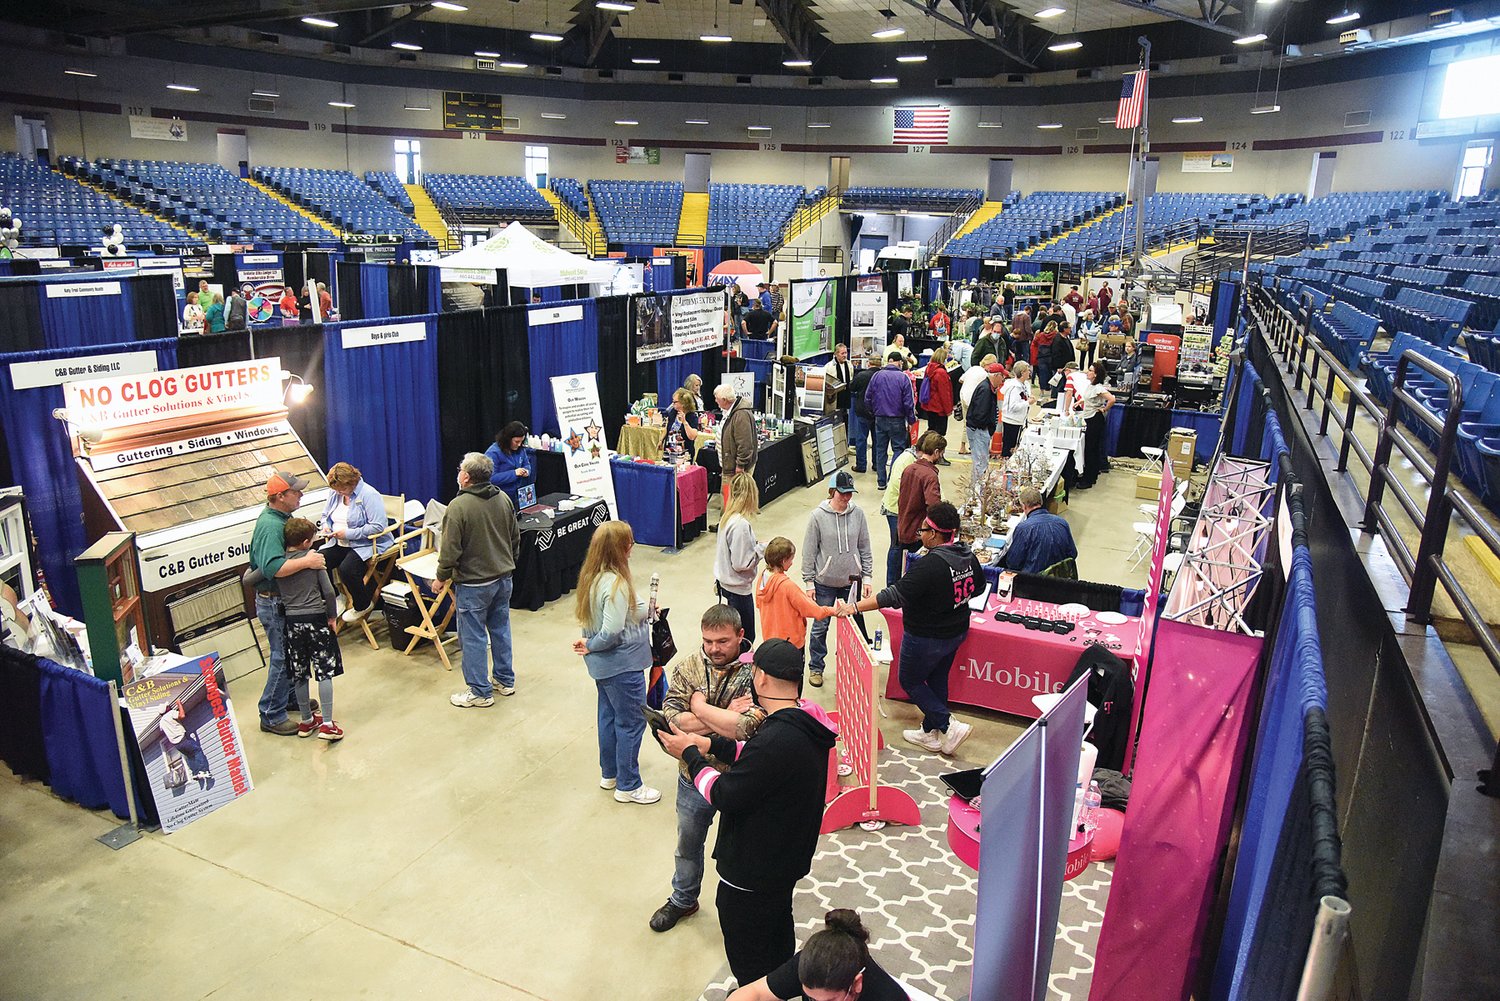 Around 12.30 p.m. Saturday, close to 725 people visited the Home and Garden Show at the Mathewson Exhibition Center. By the end of the day, 1,500 people had attended the event that had nearly 70 vendors participating in the show.